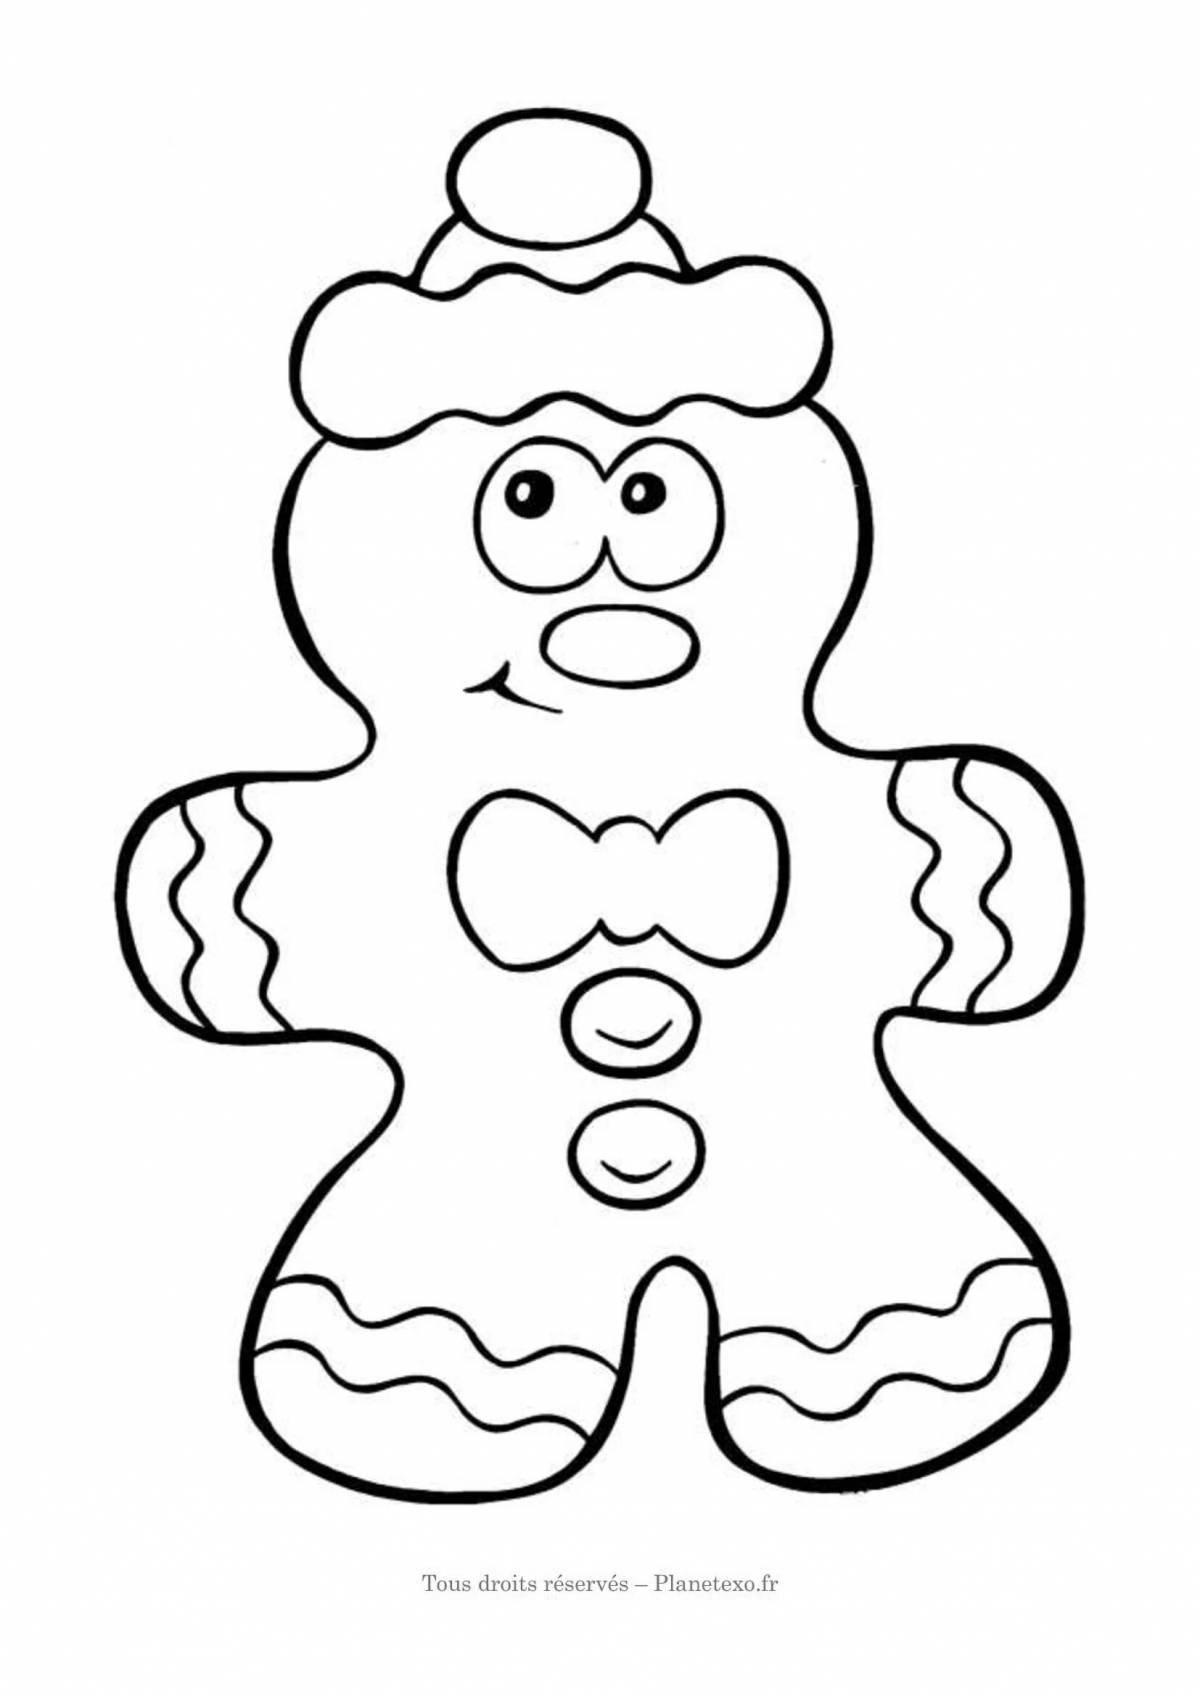 Colorful gingerbread coloring page